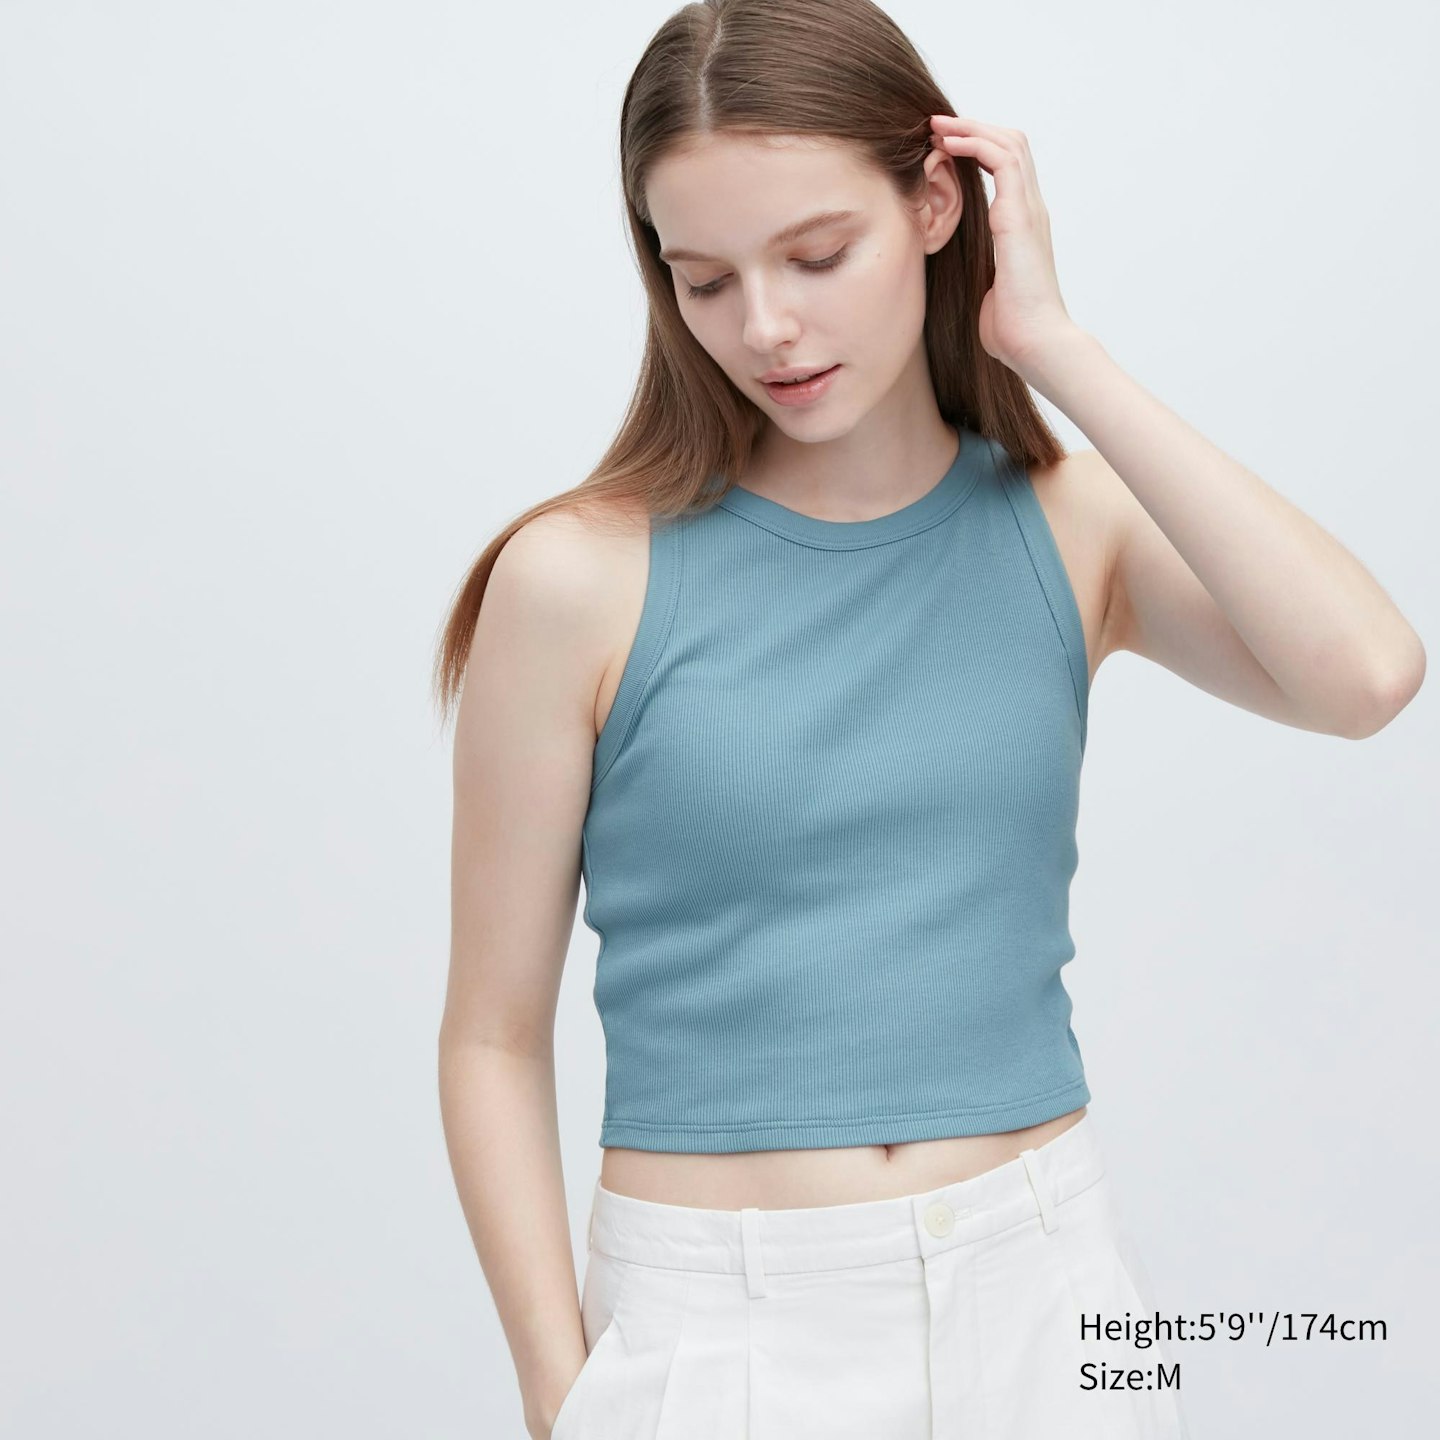 Uniqlo's New Bra Tops Are Perfect for Lazy Girls